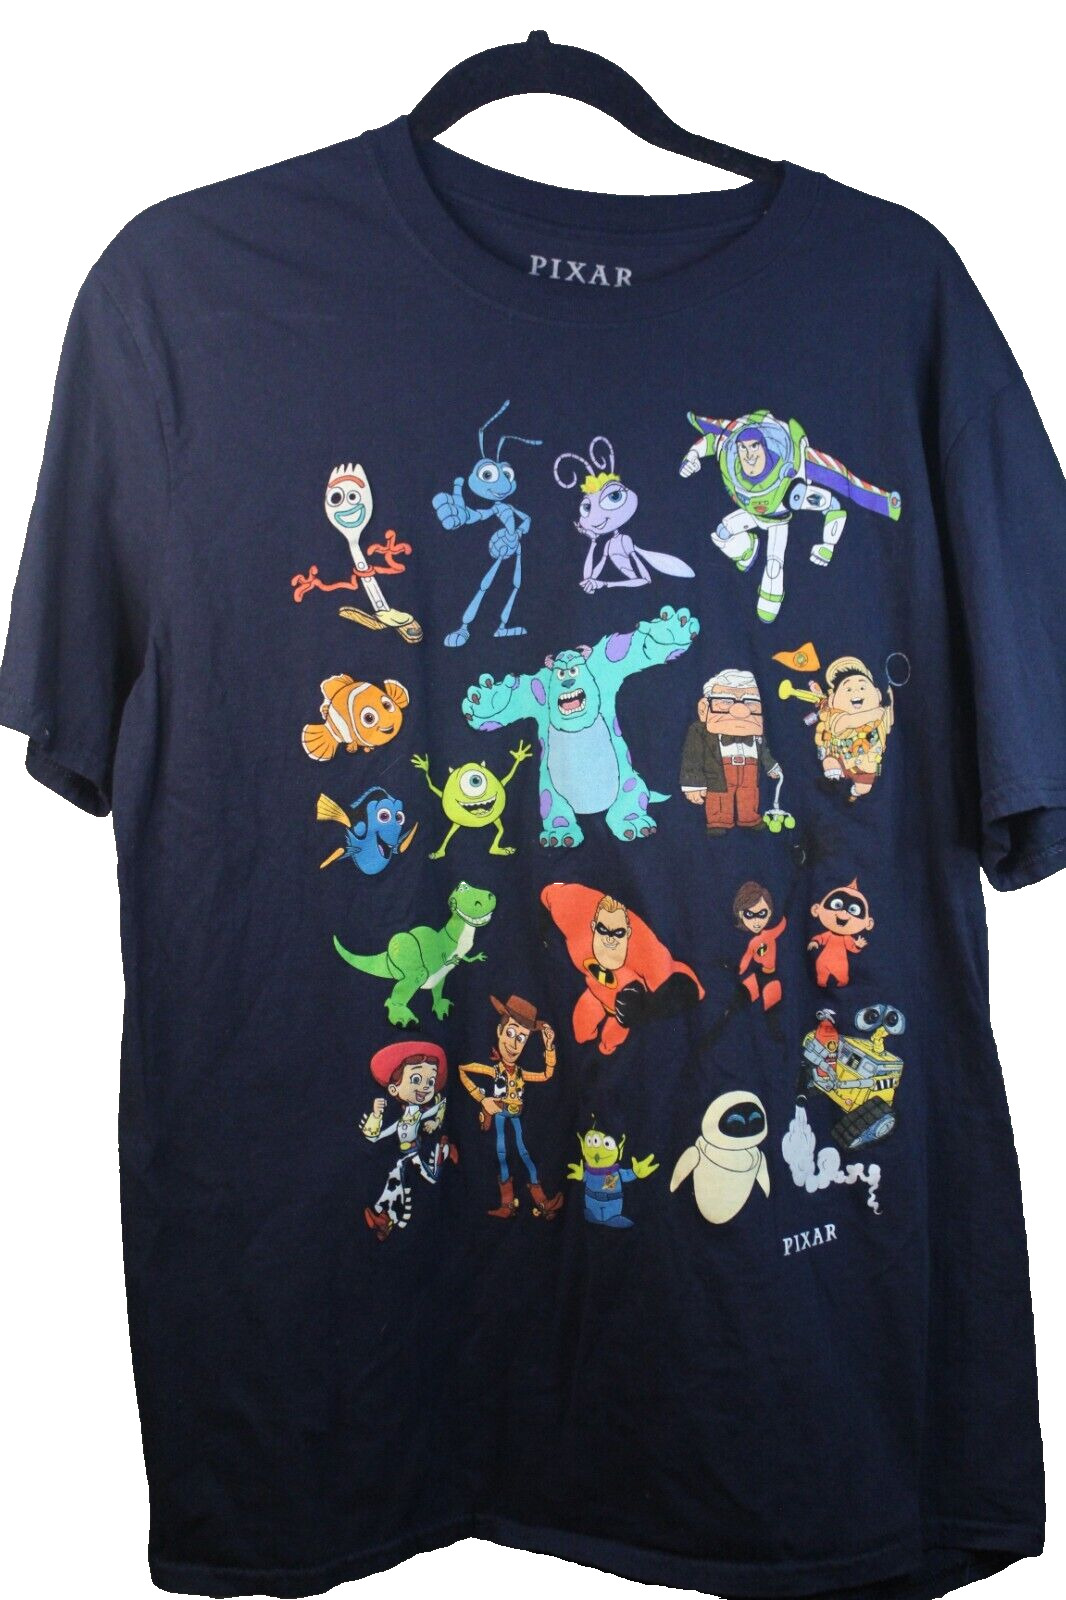 Disney’s Pixar Animation Characters Monsters Inc Up Toy Story T-Shirt Size Large